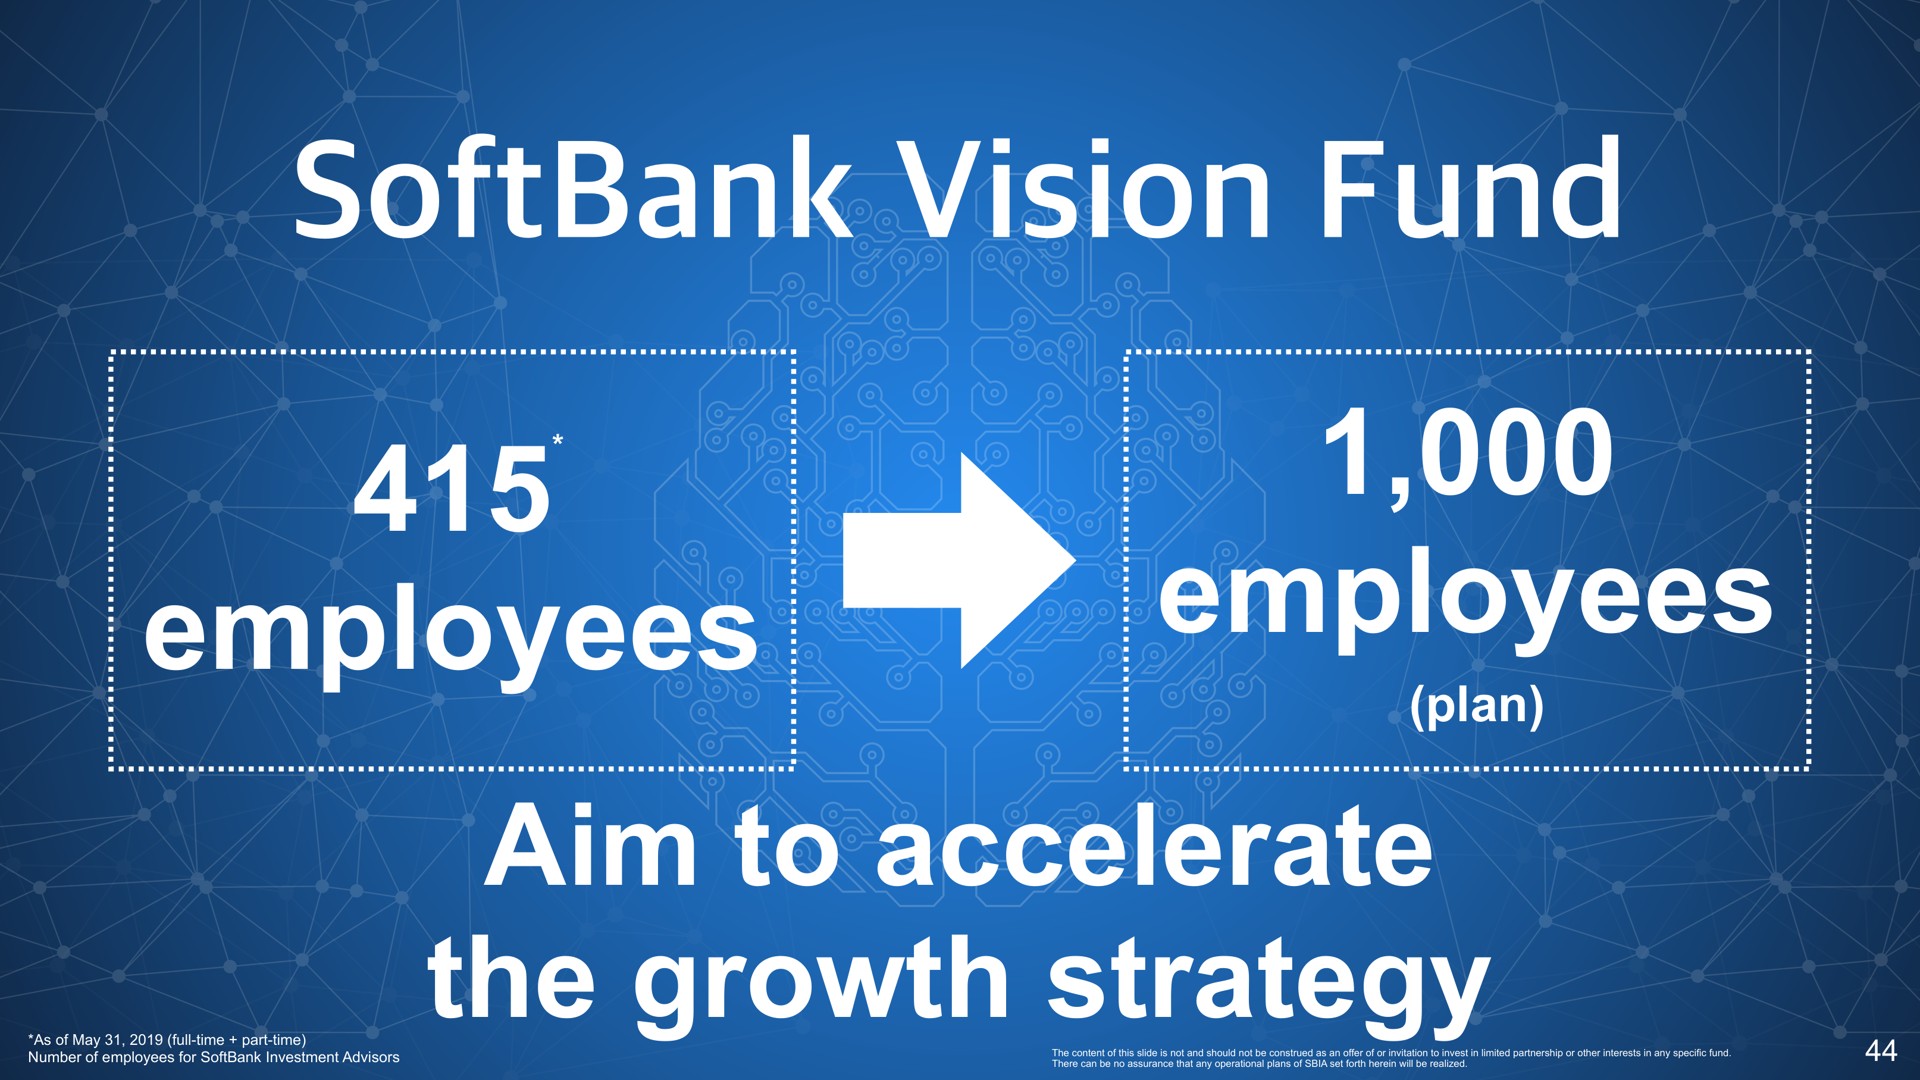 vision fund employees employees aim to accelerate the growth strategy | SoftBank